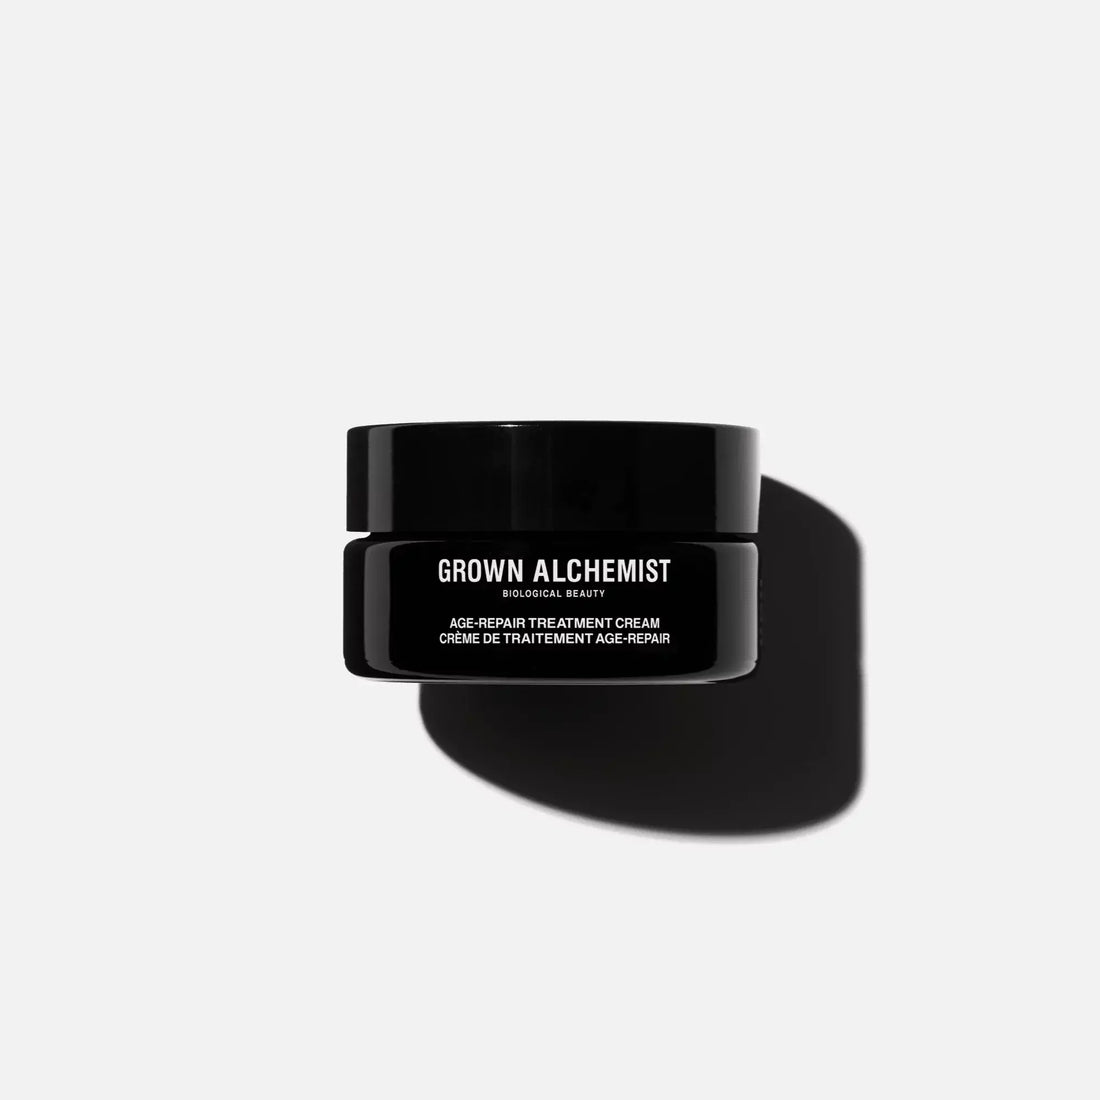 Age-Repair Treatment Cream by Grown Alchemist: Phyto-Peptide, White Tea Extract (40ml)